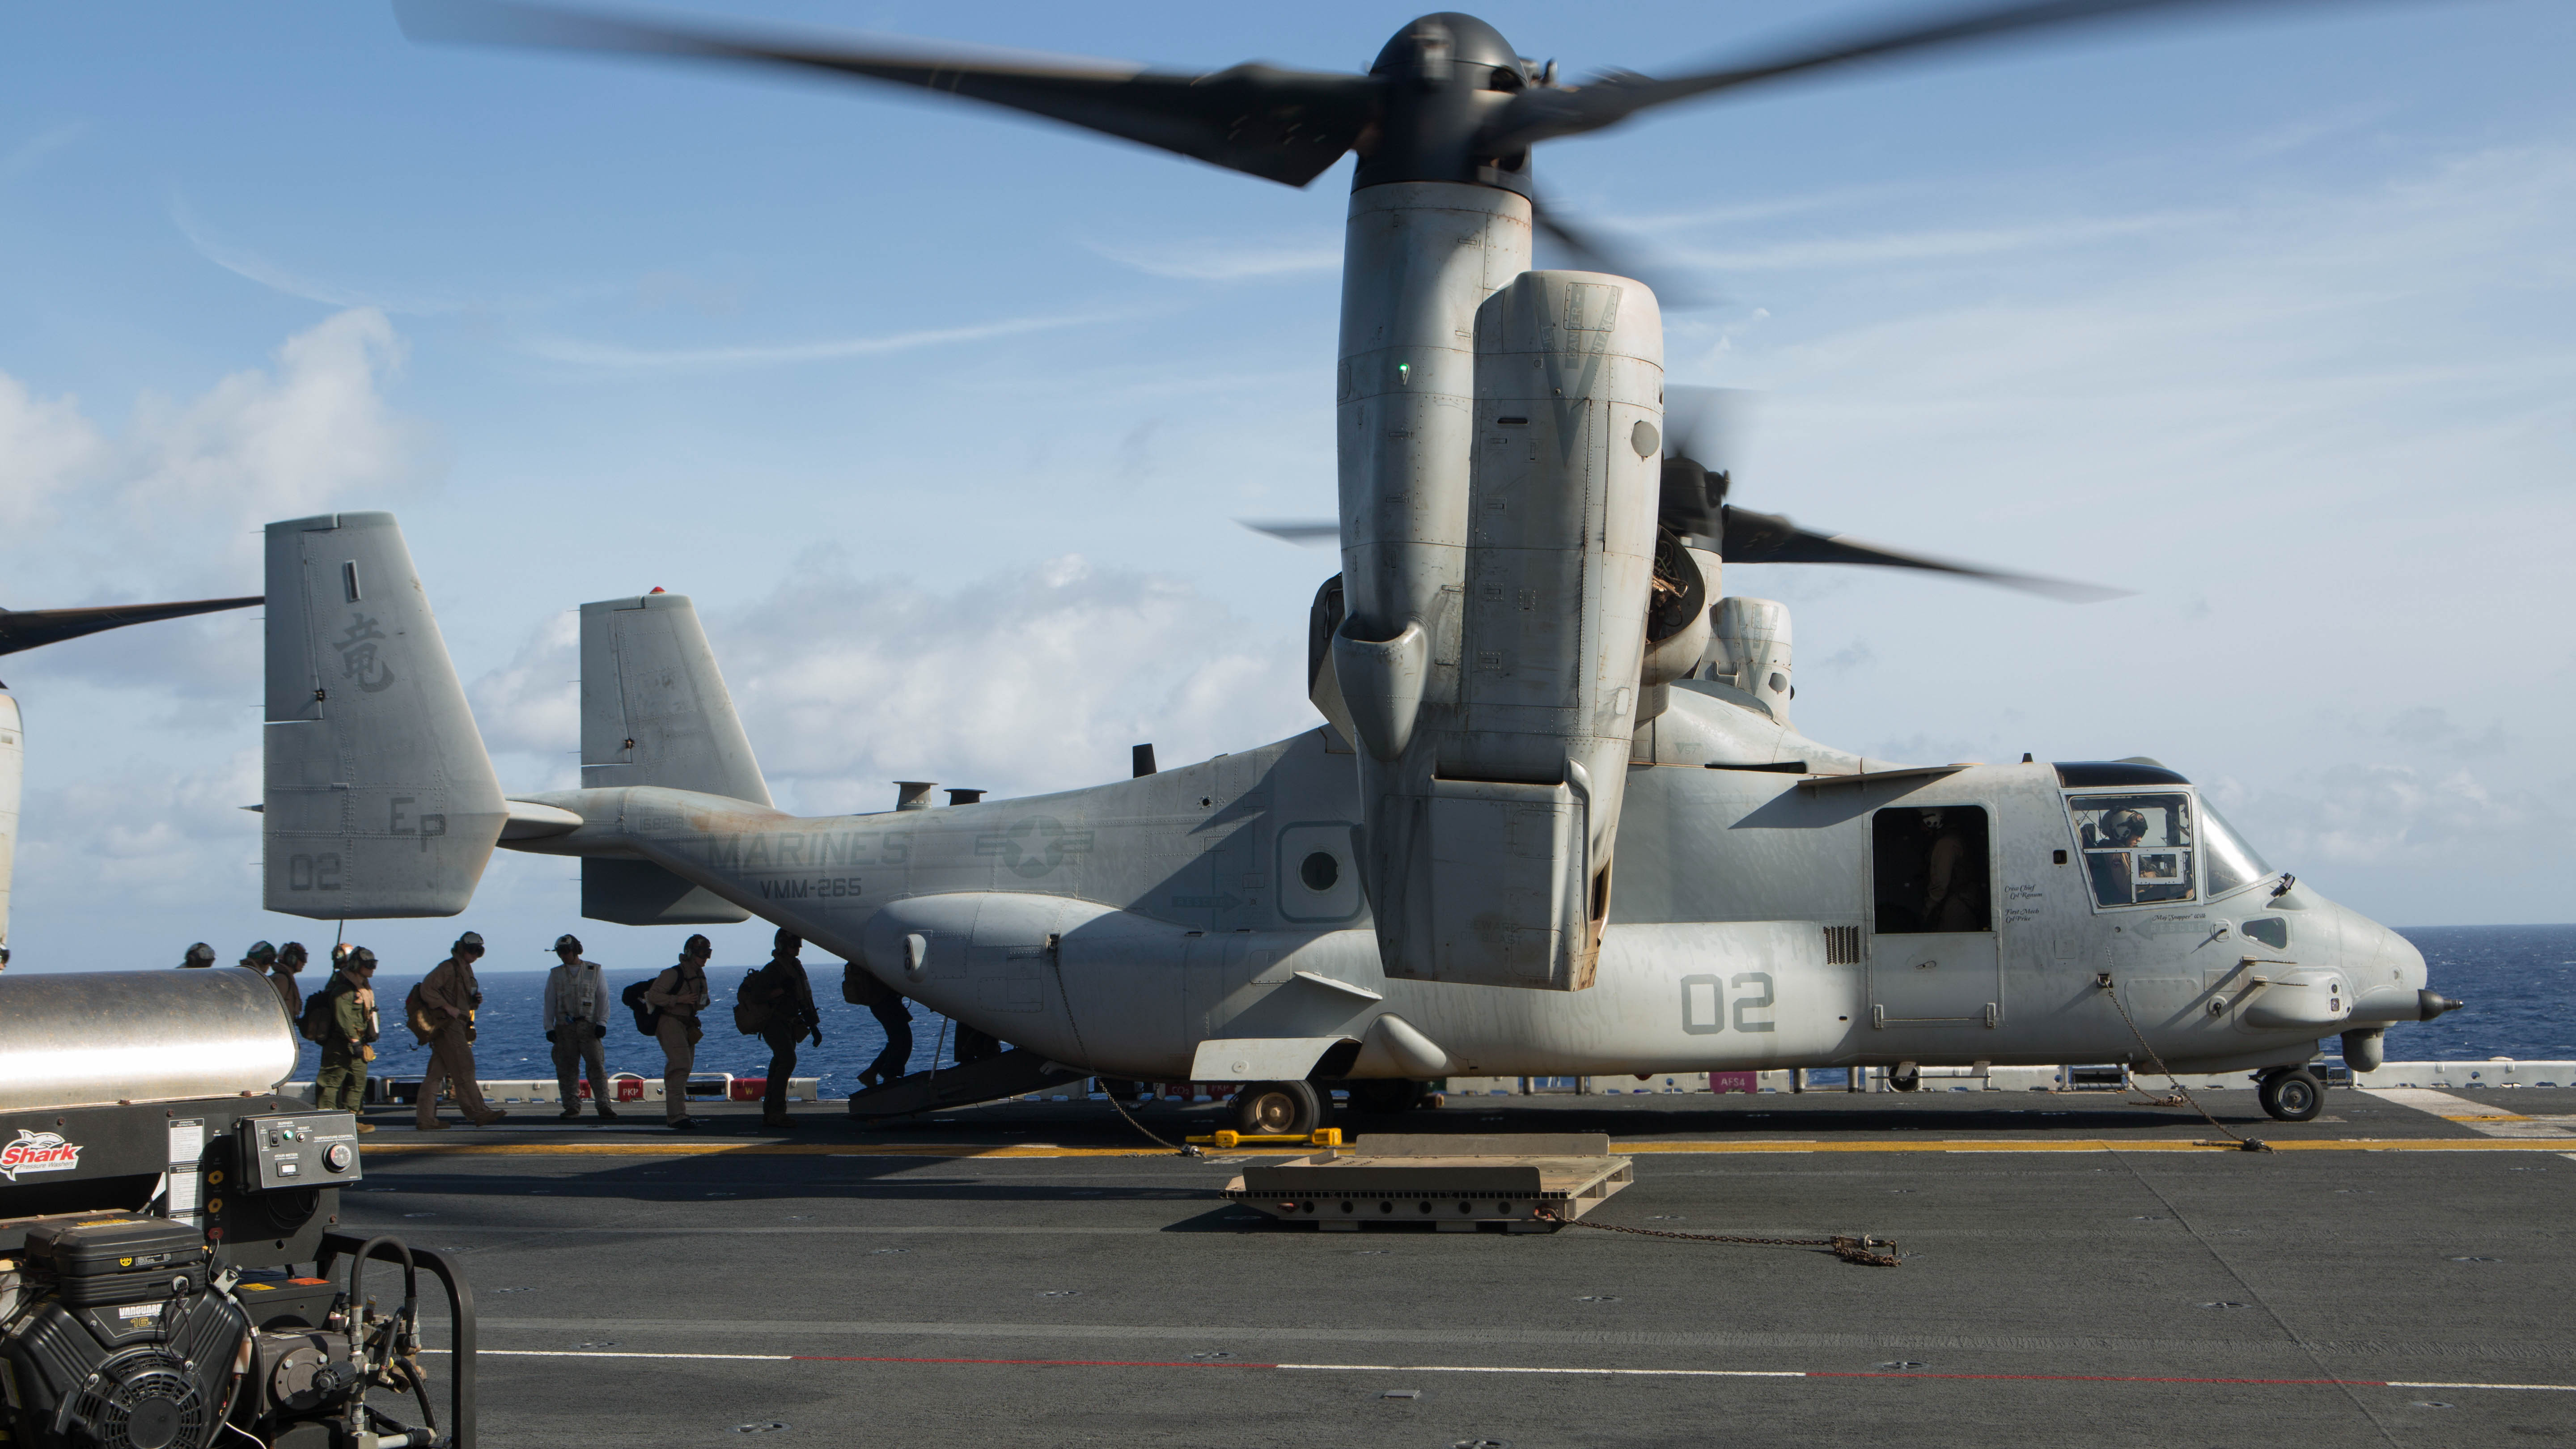 U.S. Marines and sailors with the 31st Marine Expeditionary Unit load into an MV-22B Osprey aboard the USS Bonhomme Richard (LHD 6), Aug. 8, 2015. The 31st MEU is staging Ospreys in Guam in support of typhoon recovery efforts in Saipan. The aircraft will be on standby in the event their aerial lift capacity is needed to distribute emergency supplies to remote areas. Saipan, the most populated island in the Commonwealth of the Northern Mariana Islands, was struck by Typhoon Soudelor Aug. 2-3.  (U.S. Marine Corps photo by Cpl. Tyler Ngiraswei/ Released)